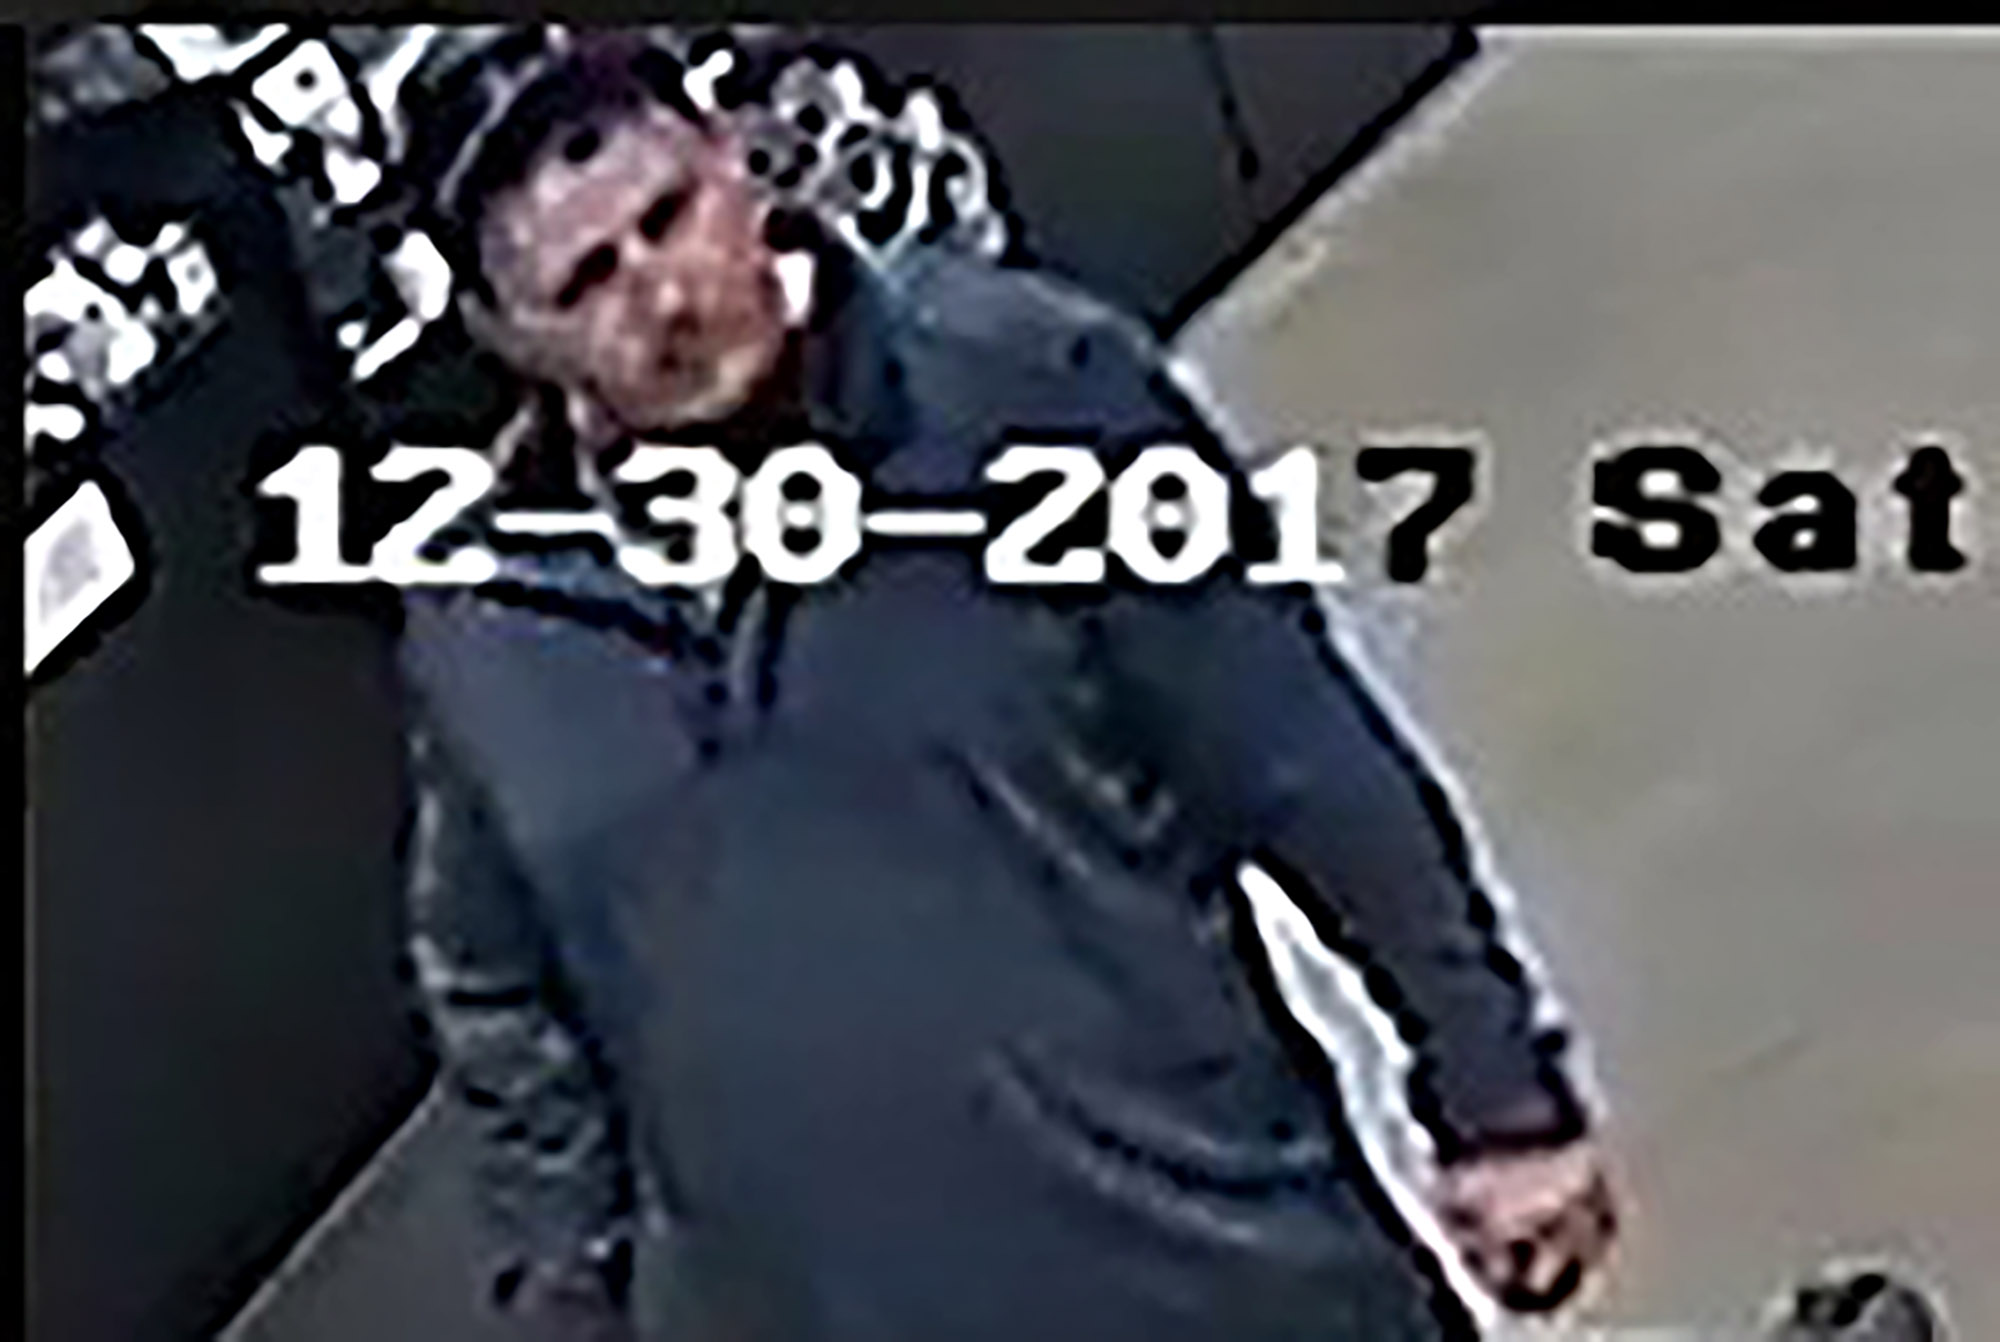 PHOTO: The Round Rock Police Department in Texas released surveillance images of Terry Allen Miles who may be with two young missing girls.